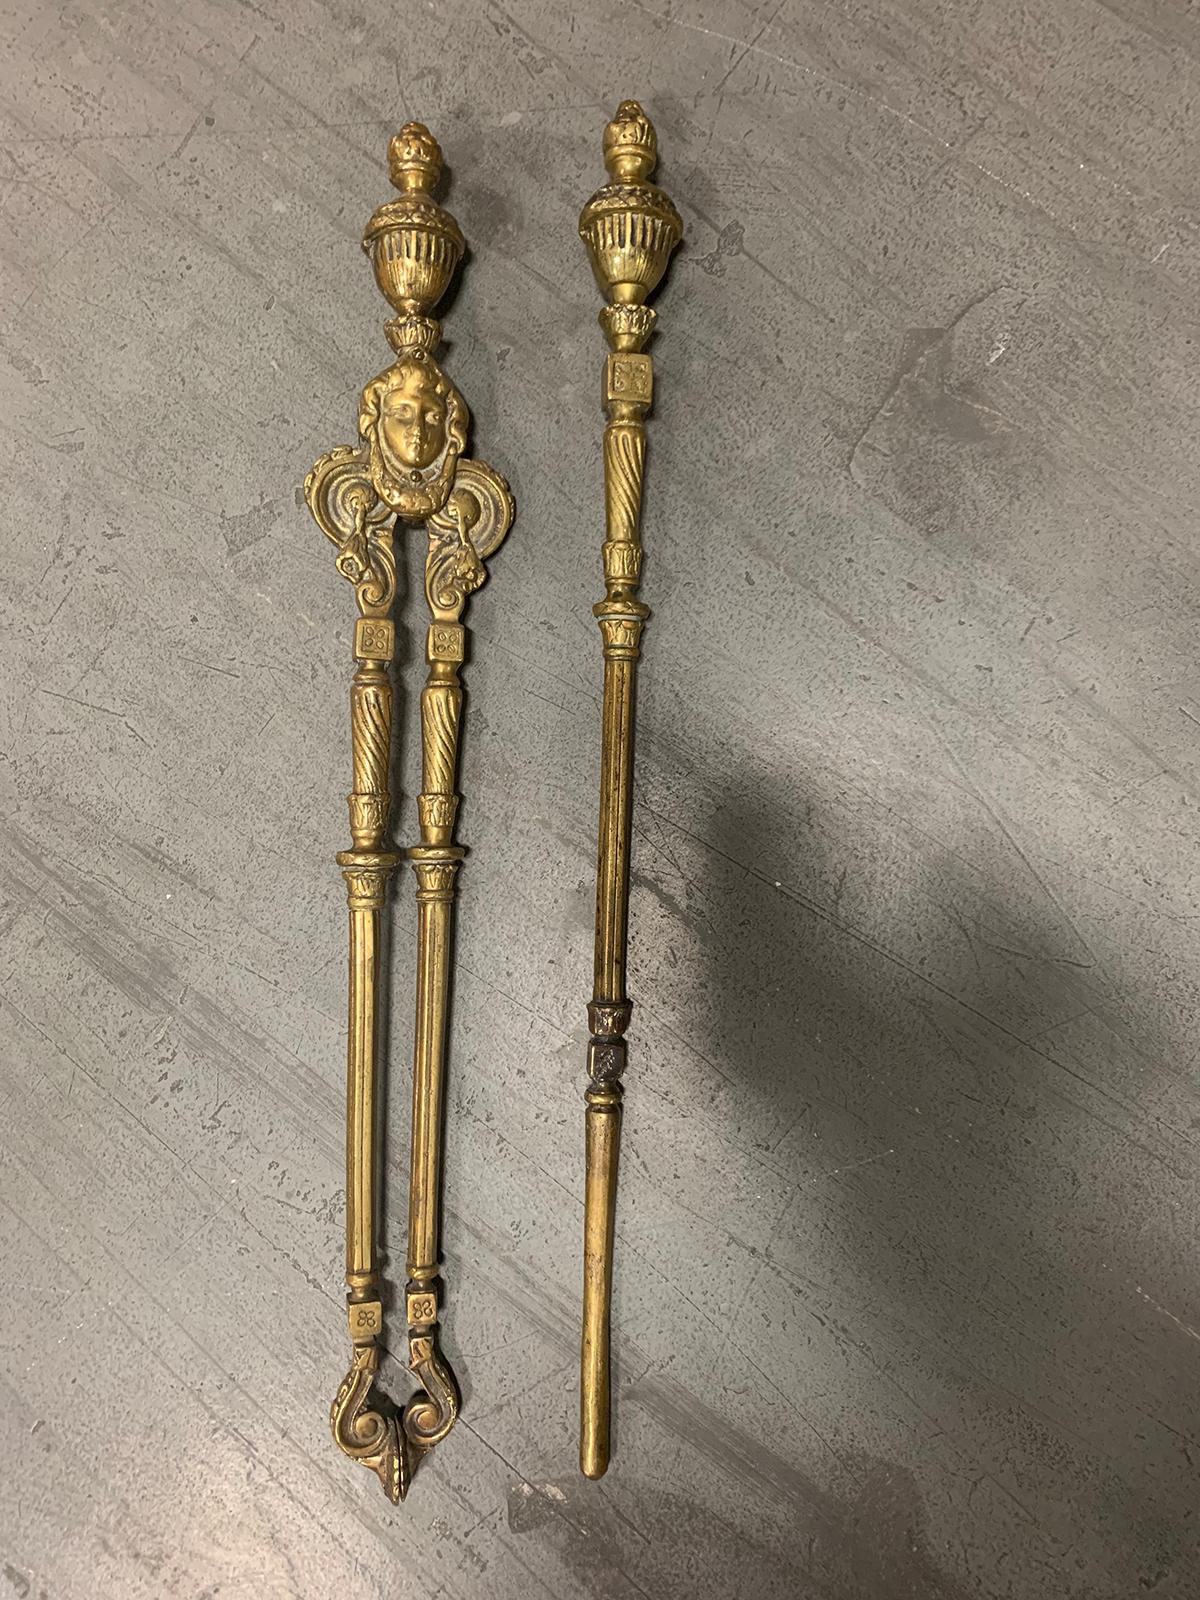 Set of two 19th-20th century French neoclassical bronze fire tools
Poker and tongs. Beautifully made.